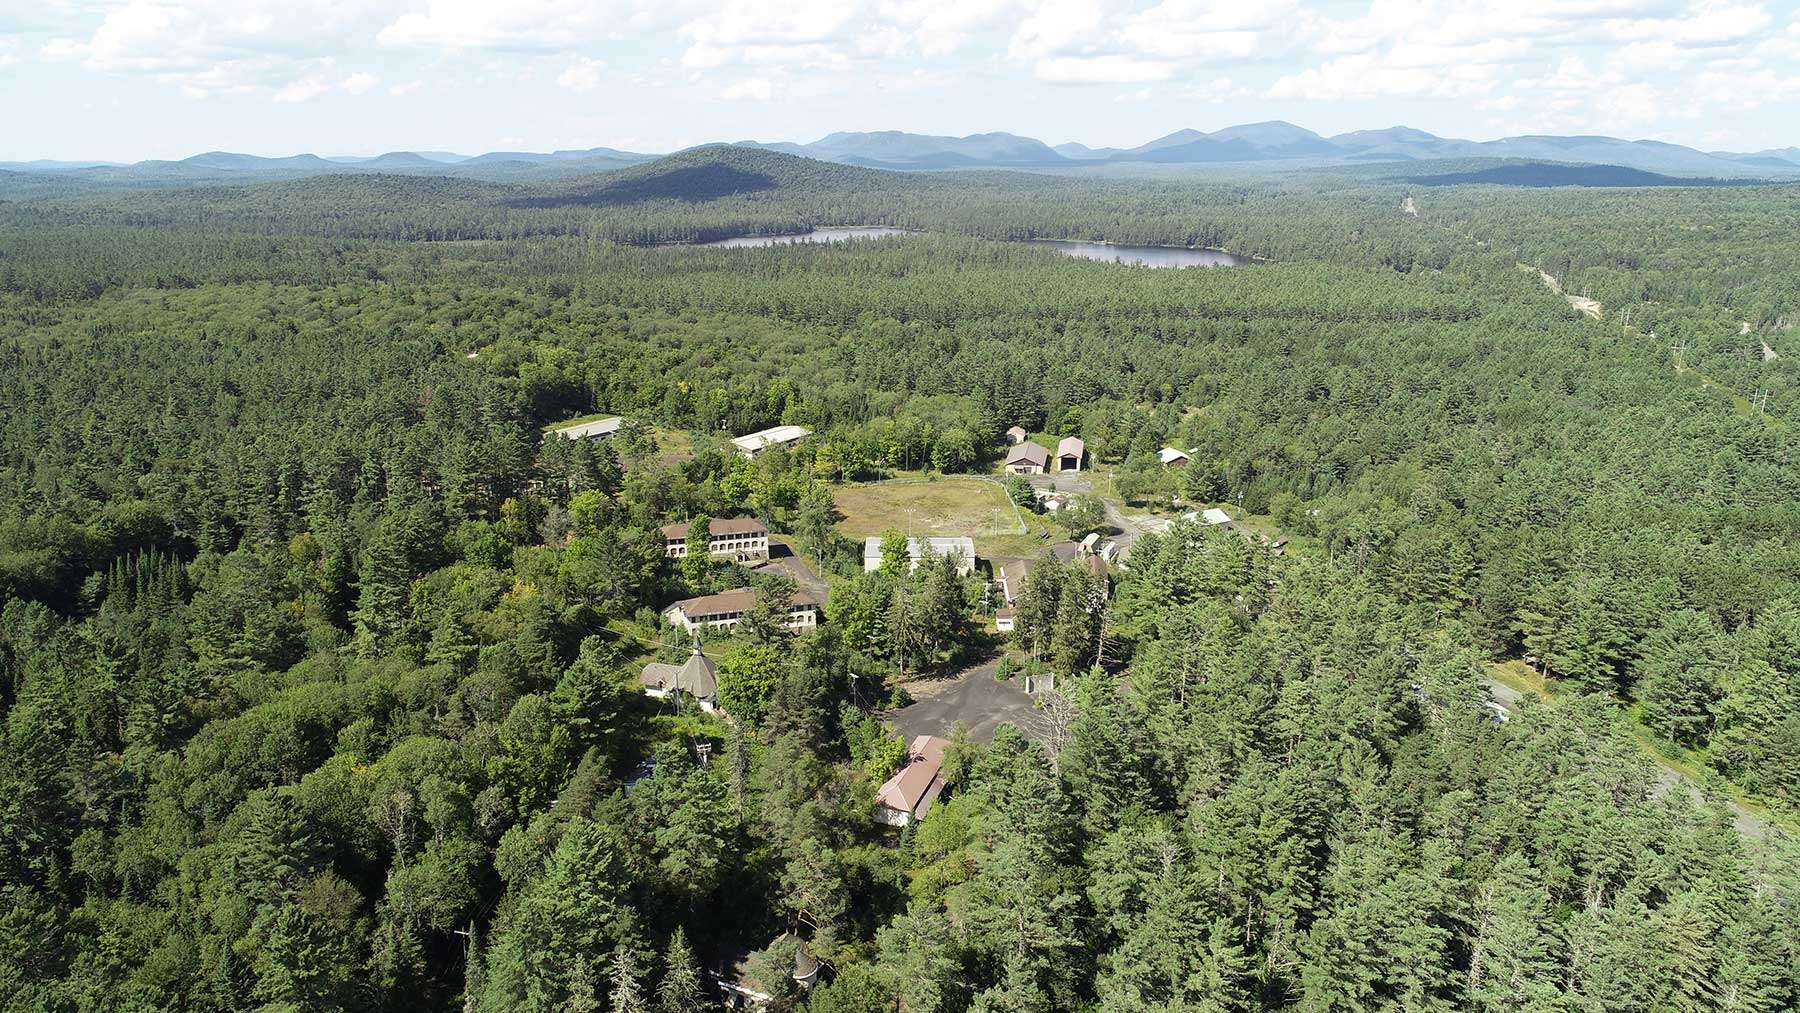 Aerial shot of the Camp Gabriels closed prison in the Adirondack Park